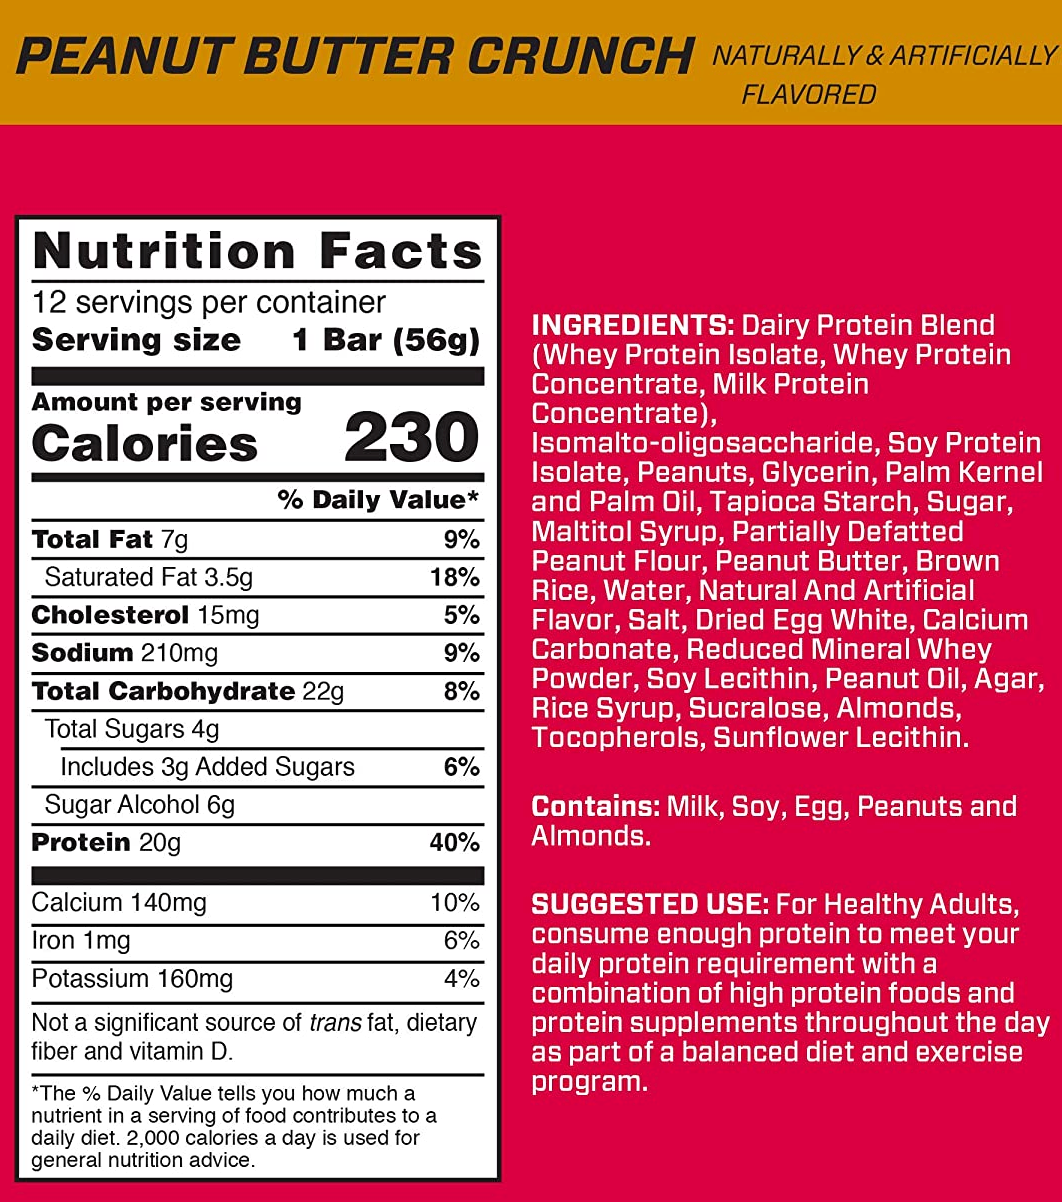 Nutrition facts for Peanut Butter Crunch bar. 12 servings per container, with 230 calories, 7g of fat, 15mg cholesterol, 20g protein per serving. Ingredients include dairy protein blend, soy protein isolate, peanuts, and almonds.